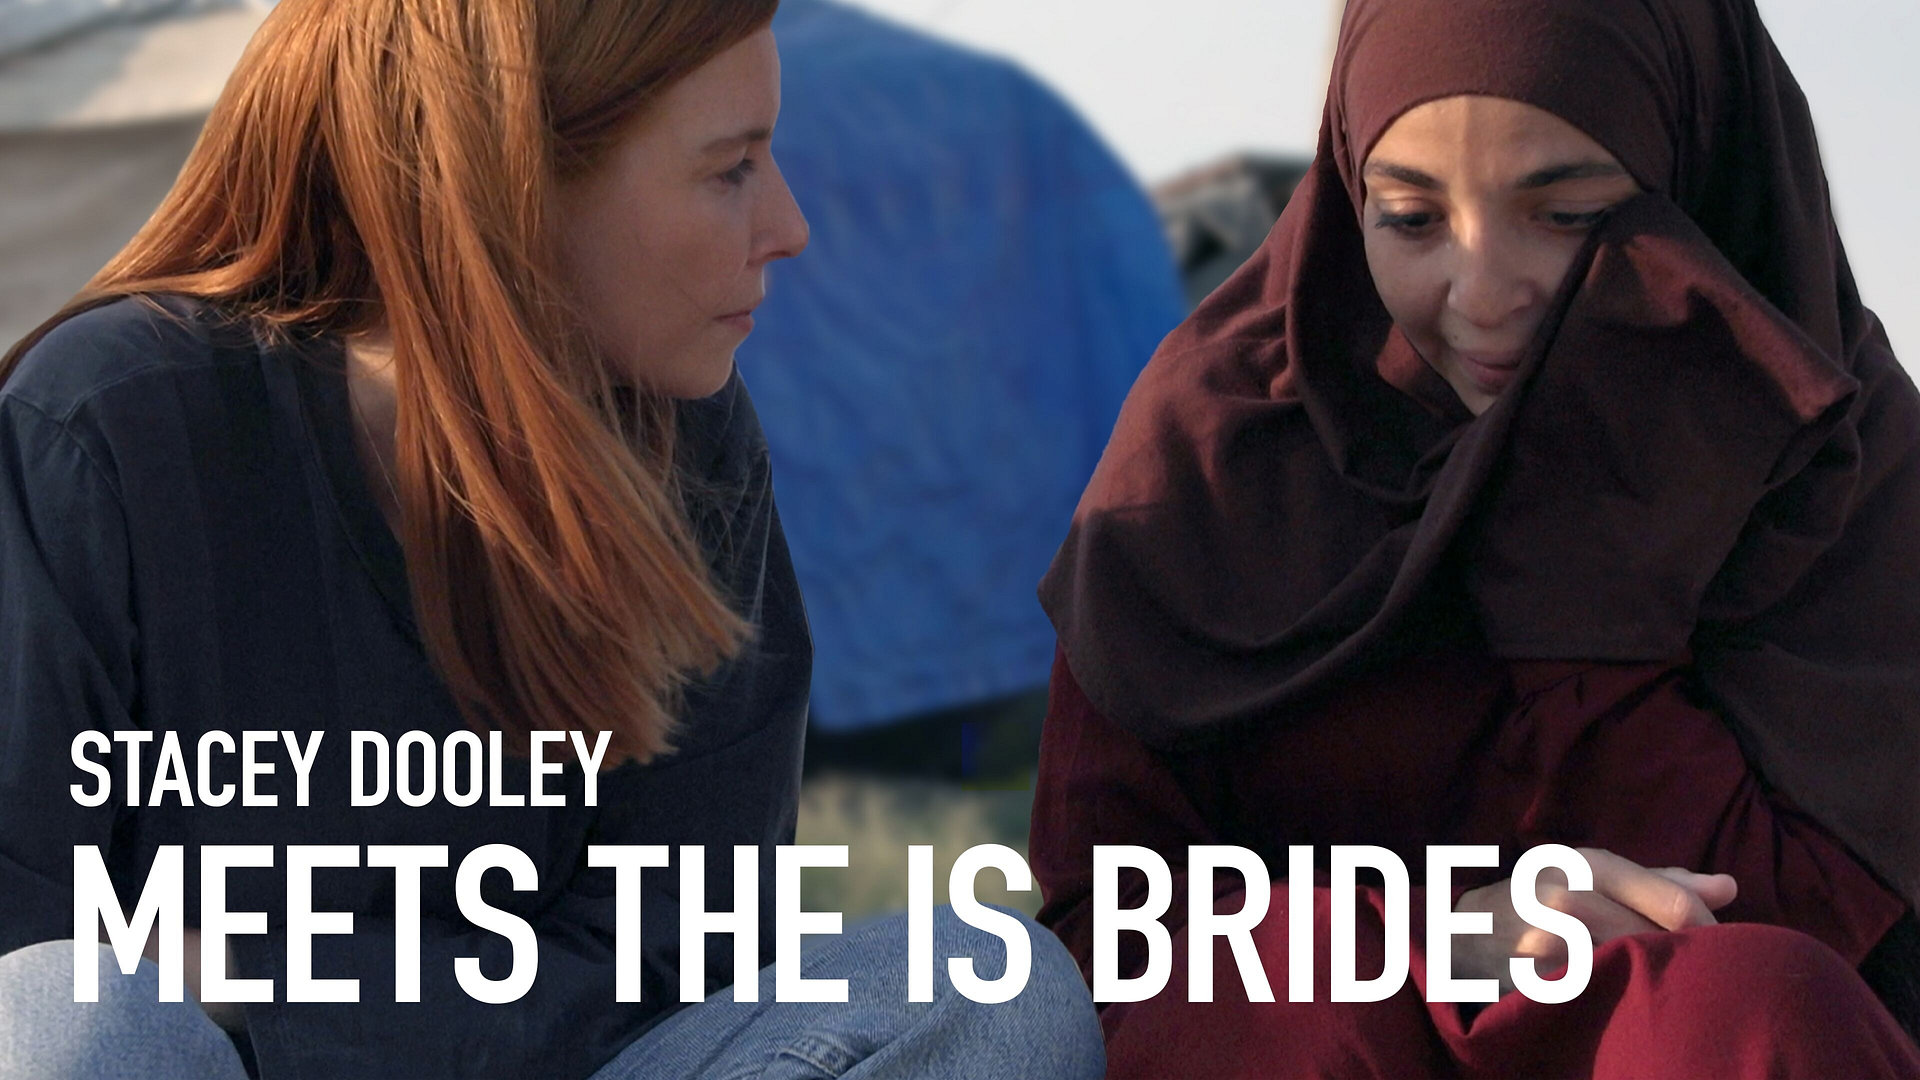 Stacey Dooley: Meets the IS Brides